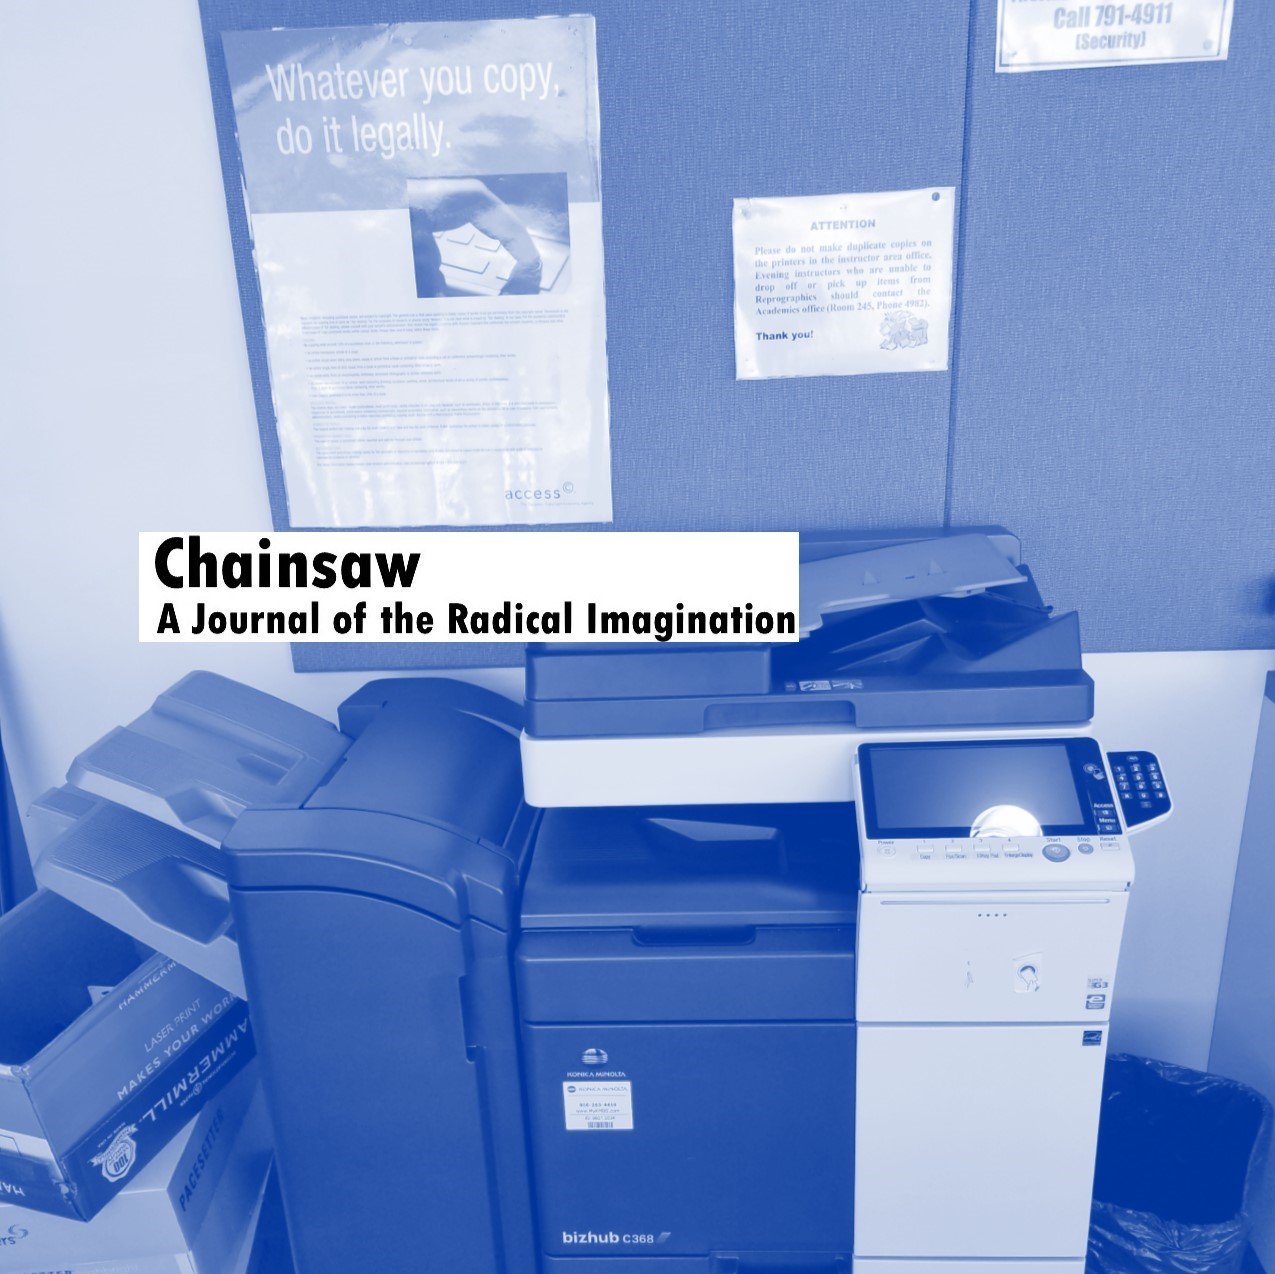 chainsaw: A Journal of the Radical Imagination